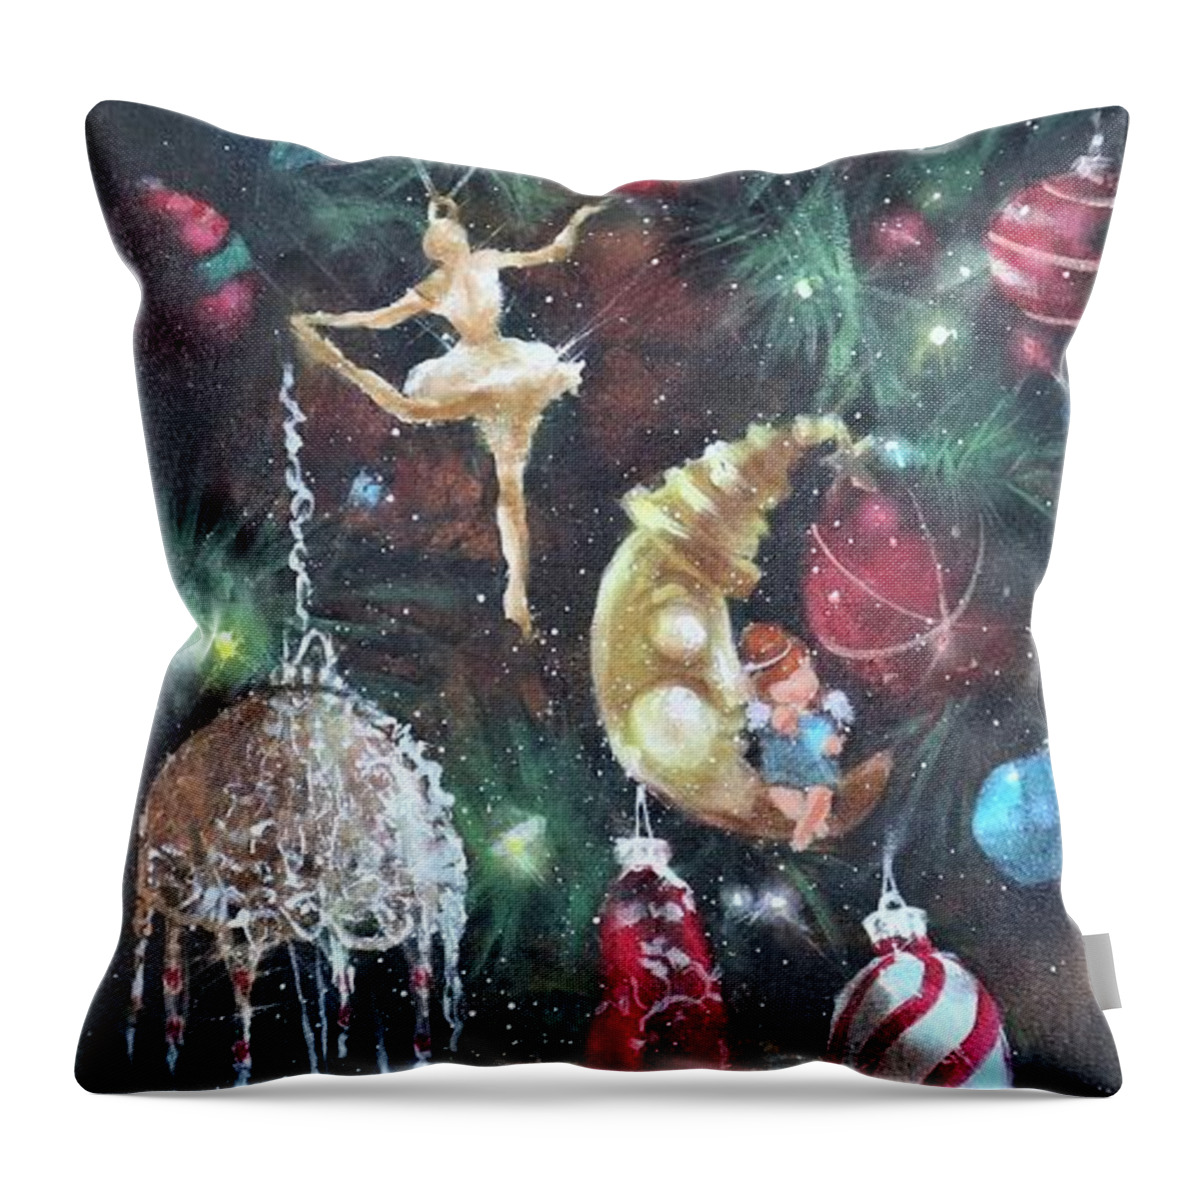  Christmas Ornaments Throw Pillow featuring the painting Favorite Things #1 by Tom Shropshire